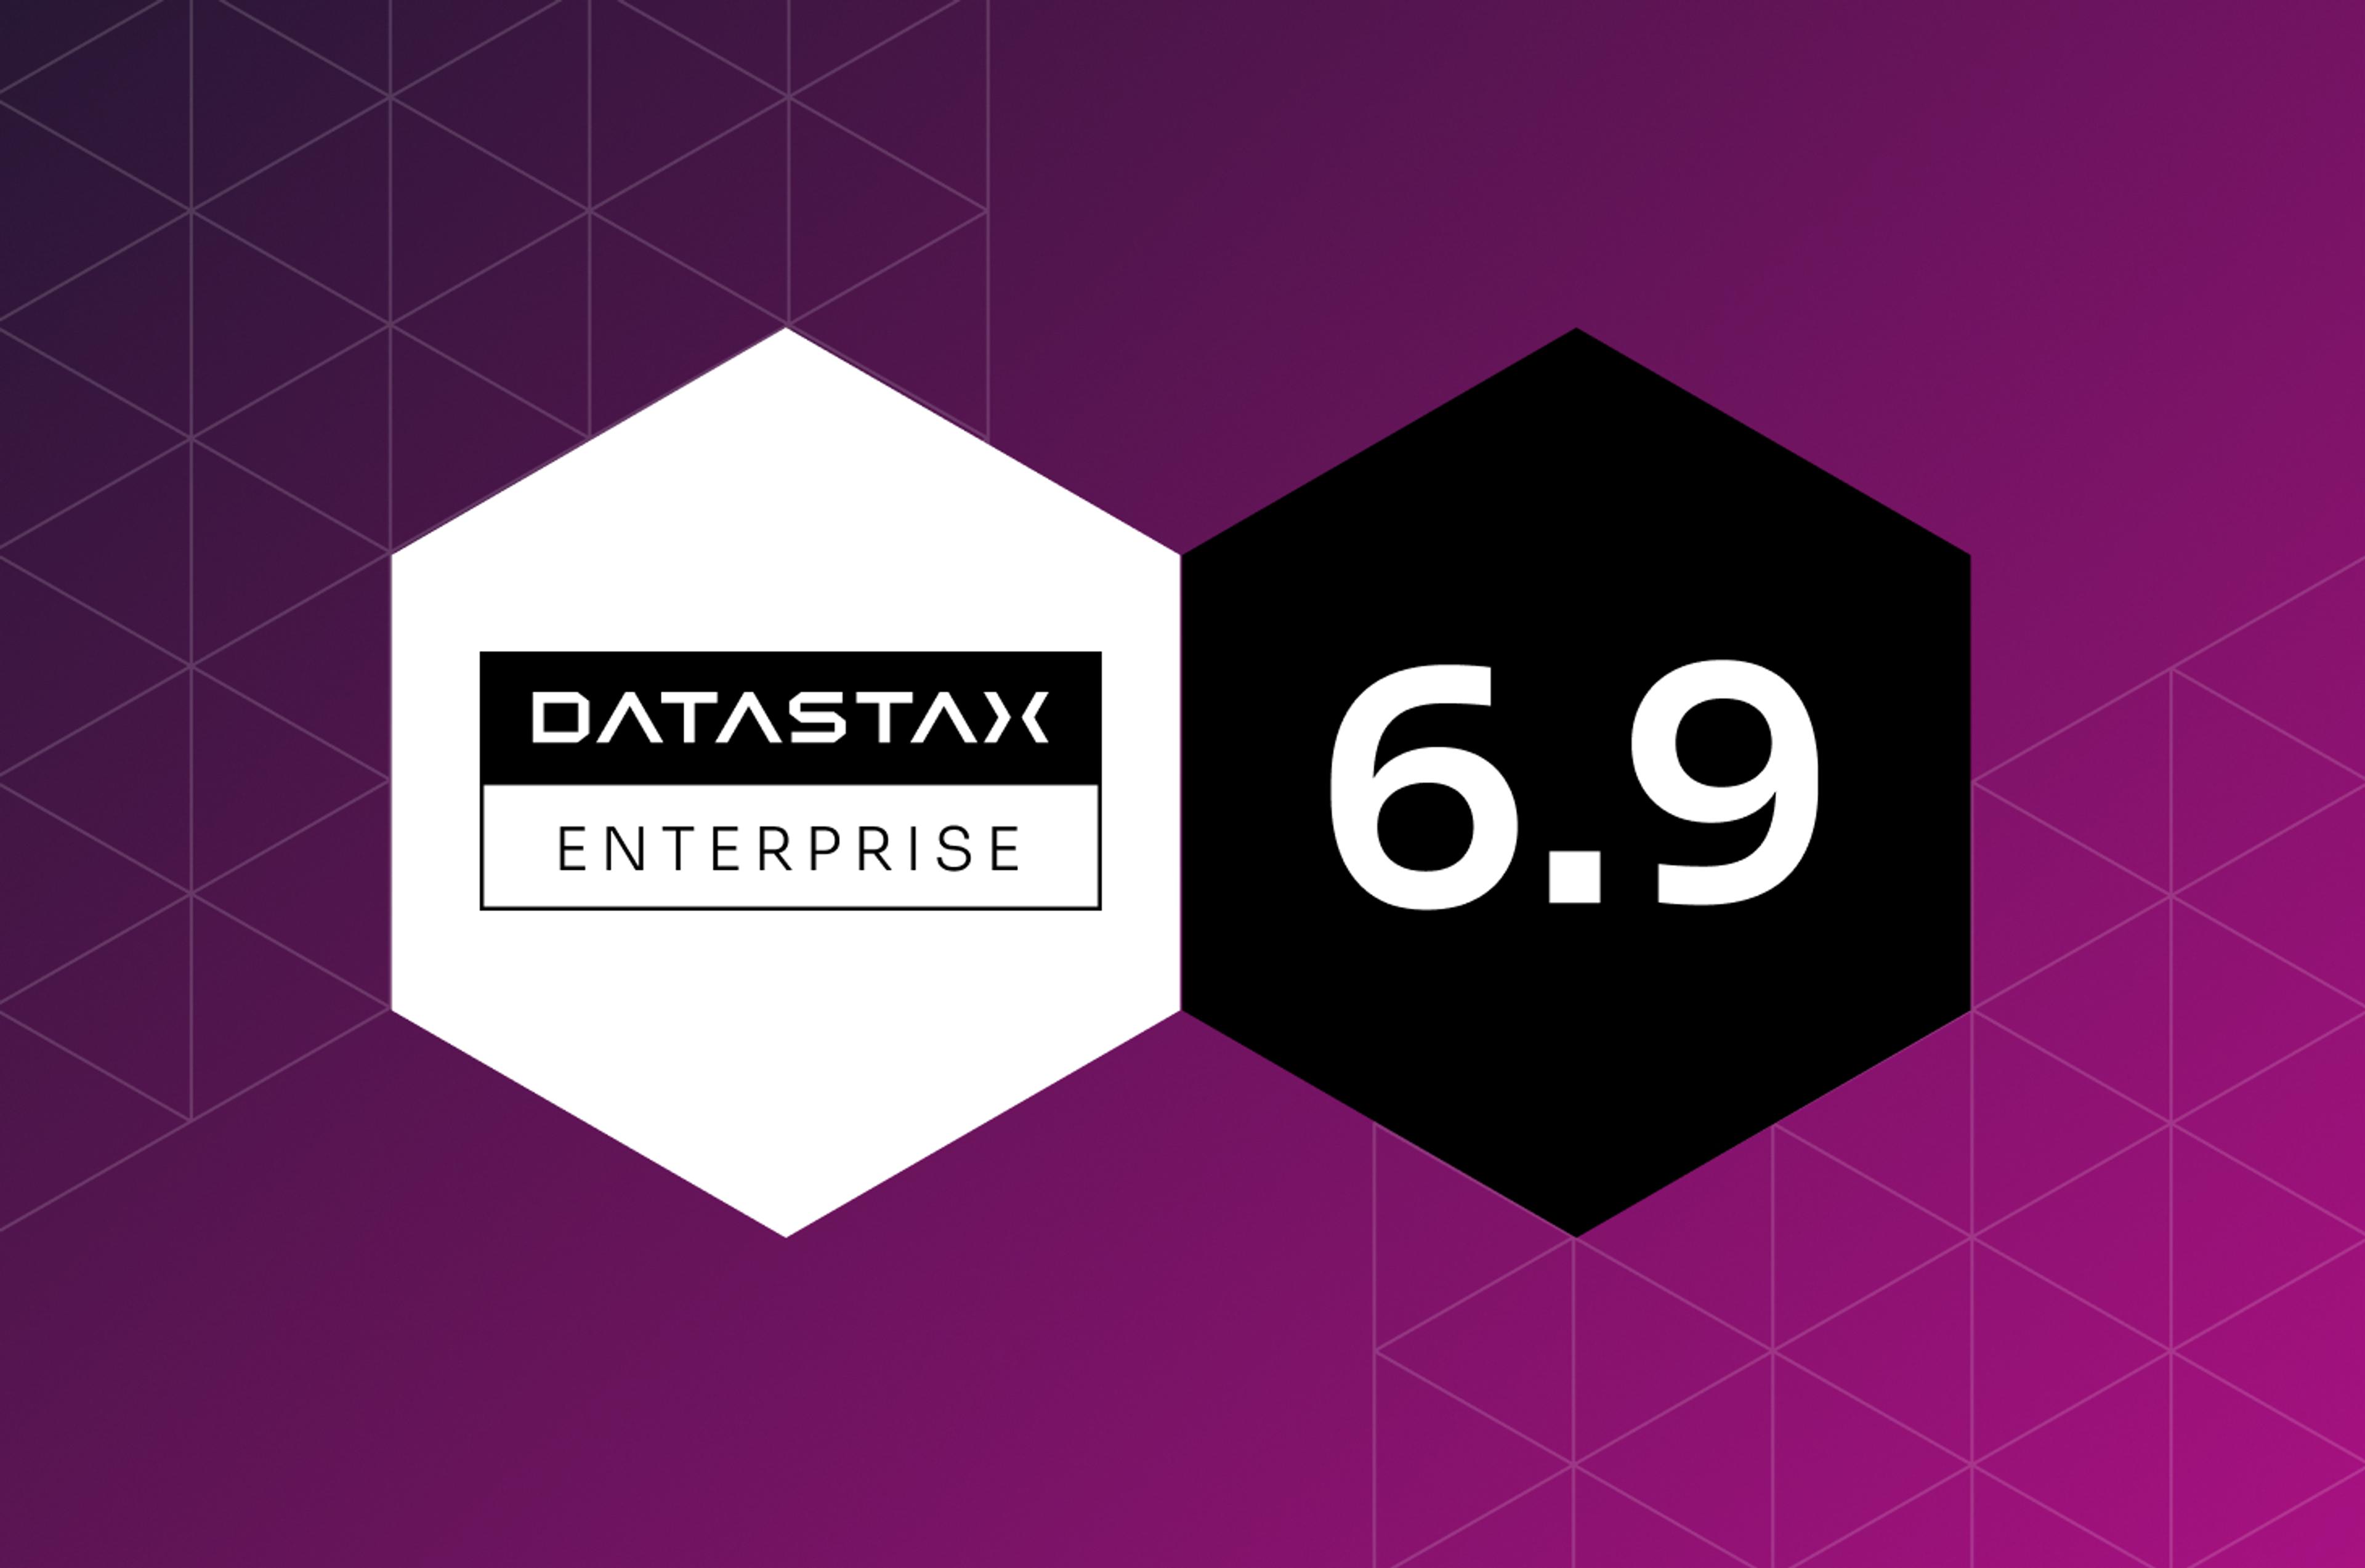 Getting Started with DataStax Enterprise 6.9